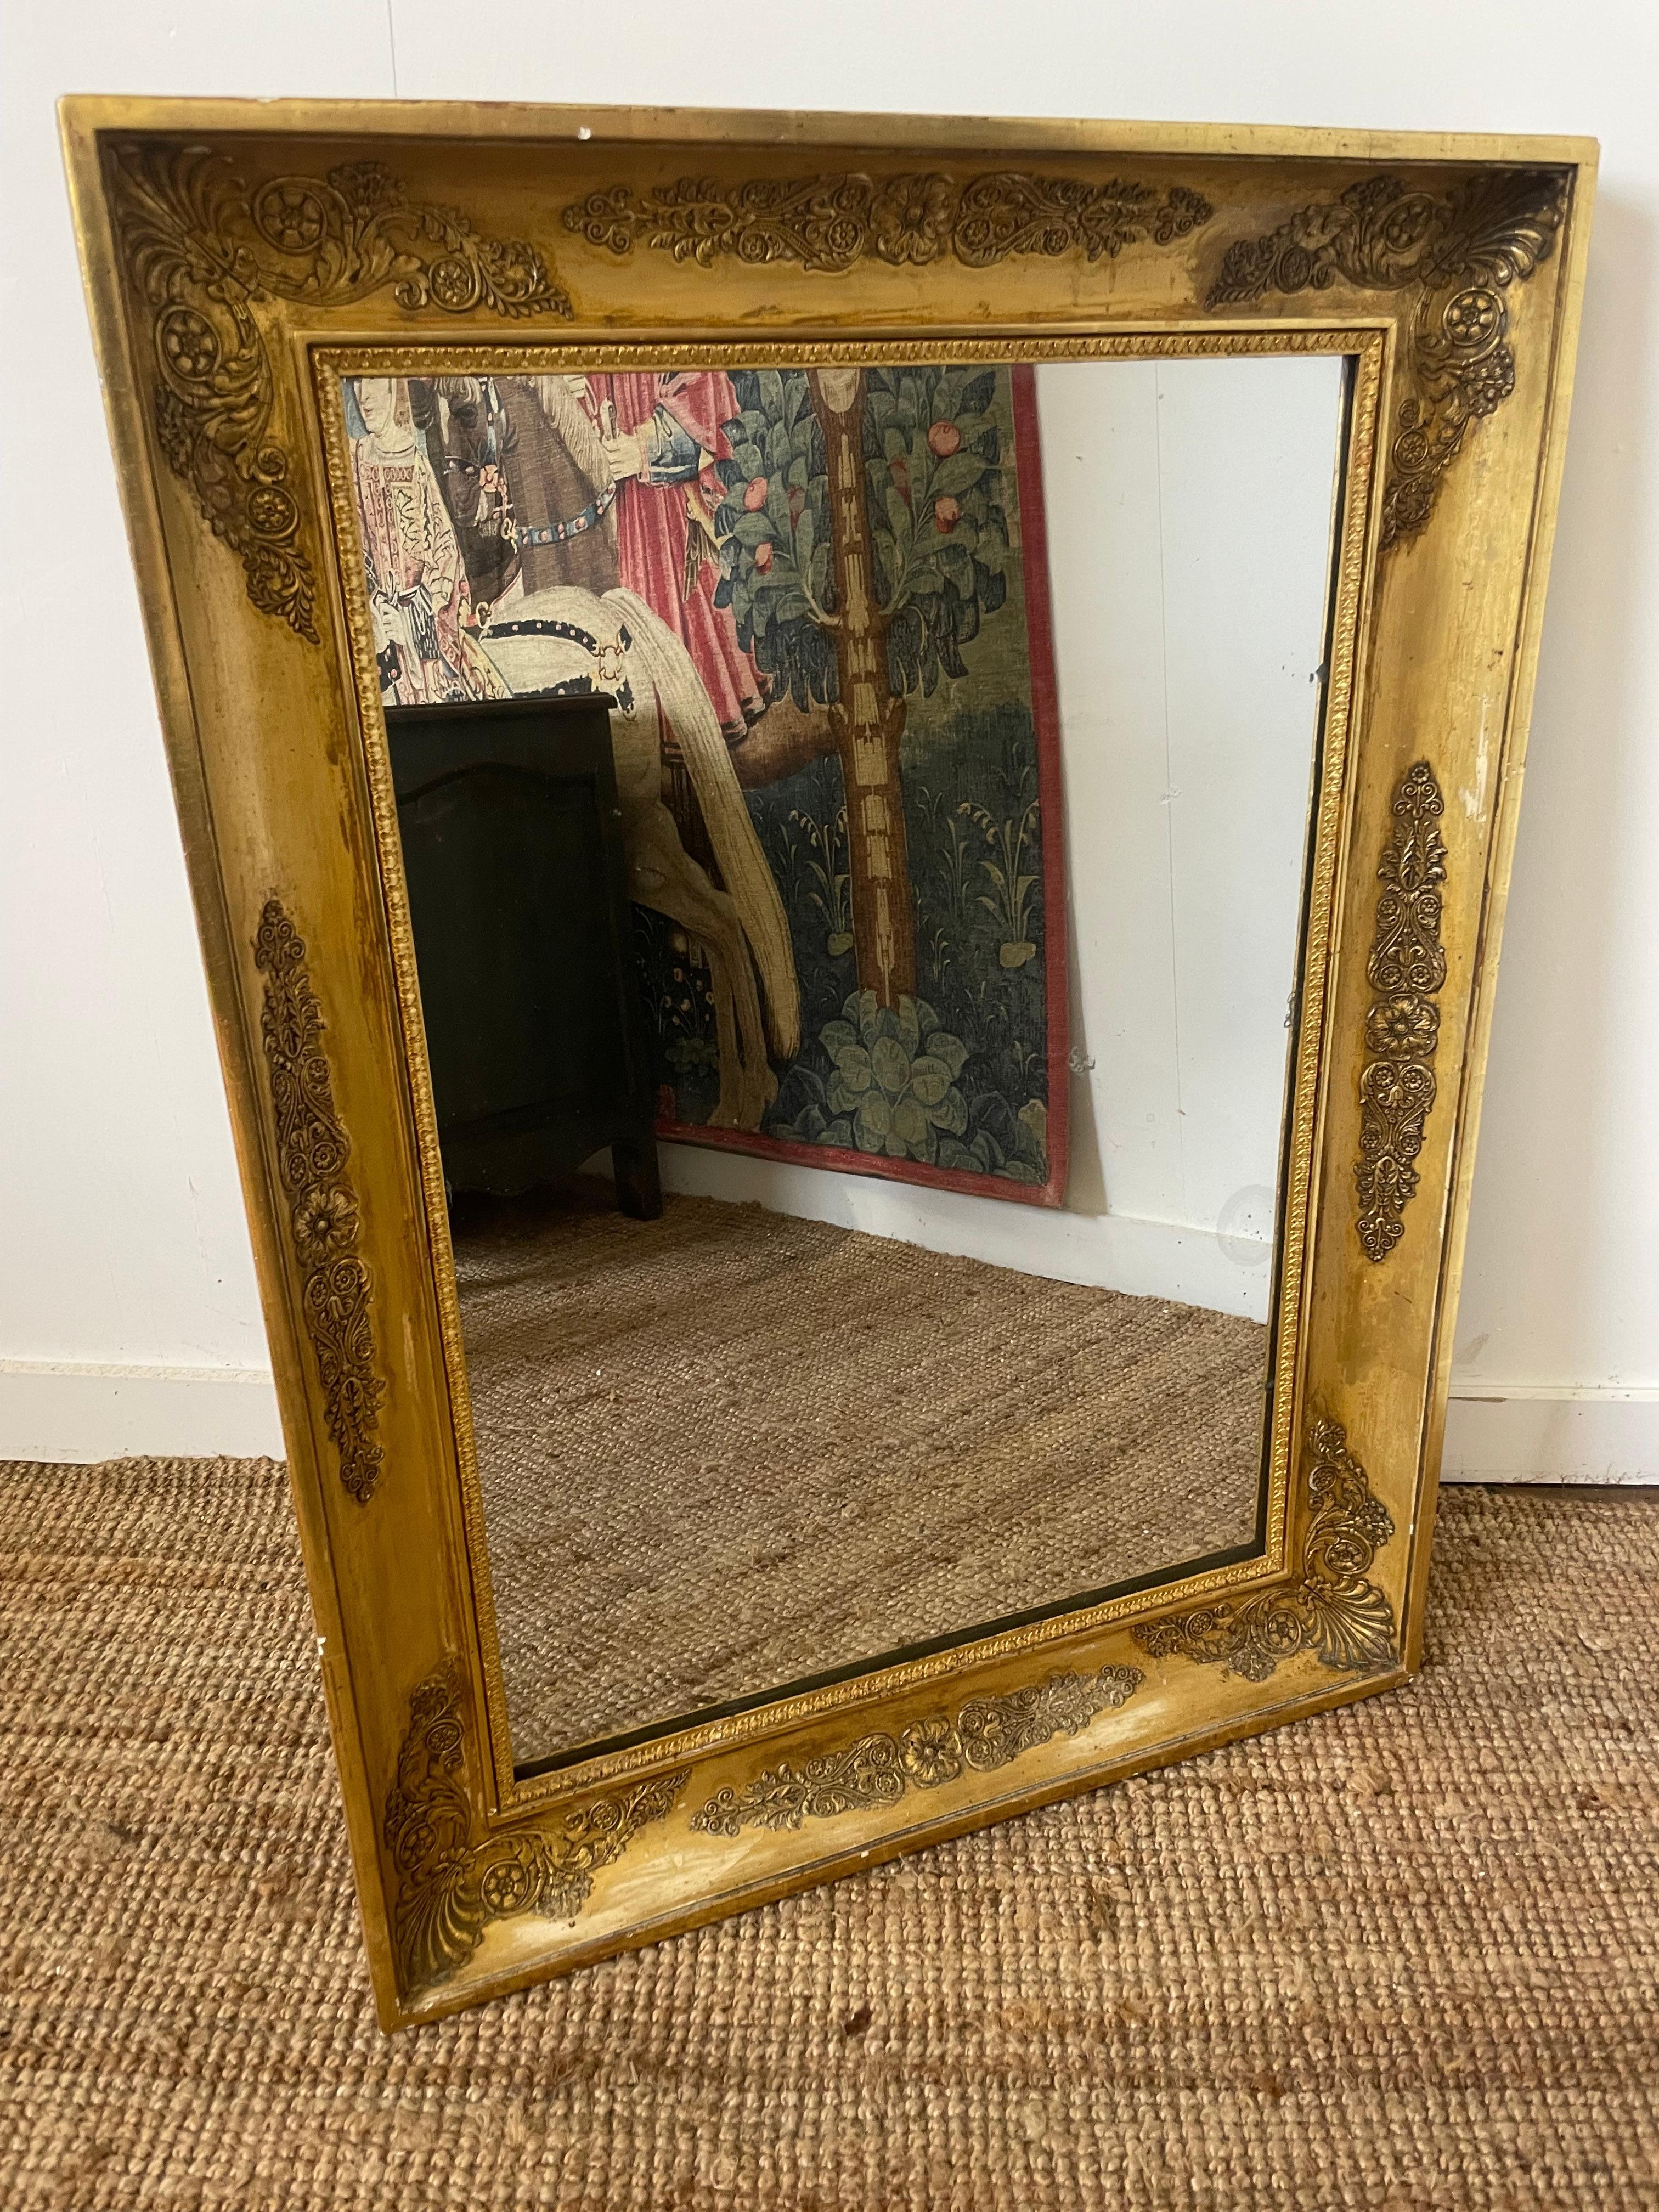 Very stylish mid 19th century gilt mirror in the Empire style
The large cushion frame surrounding the original mirror , original back boards
French circa 1860